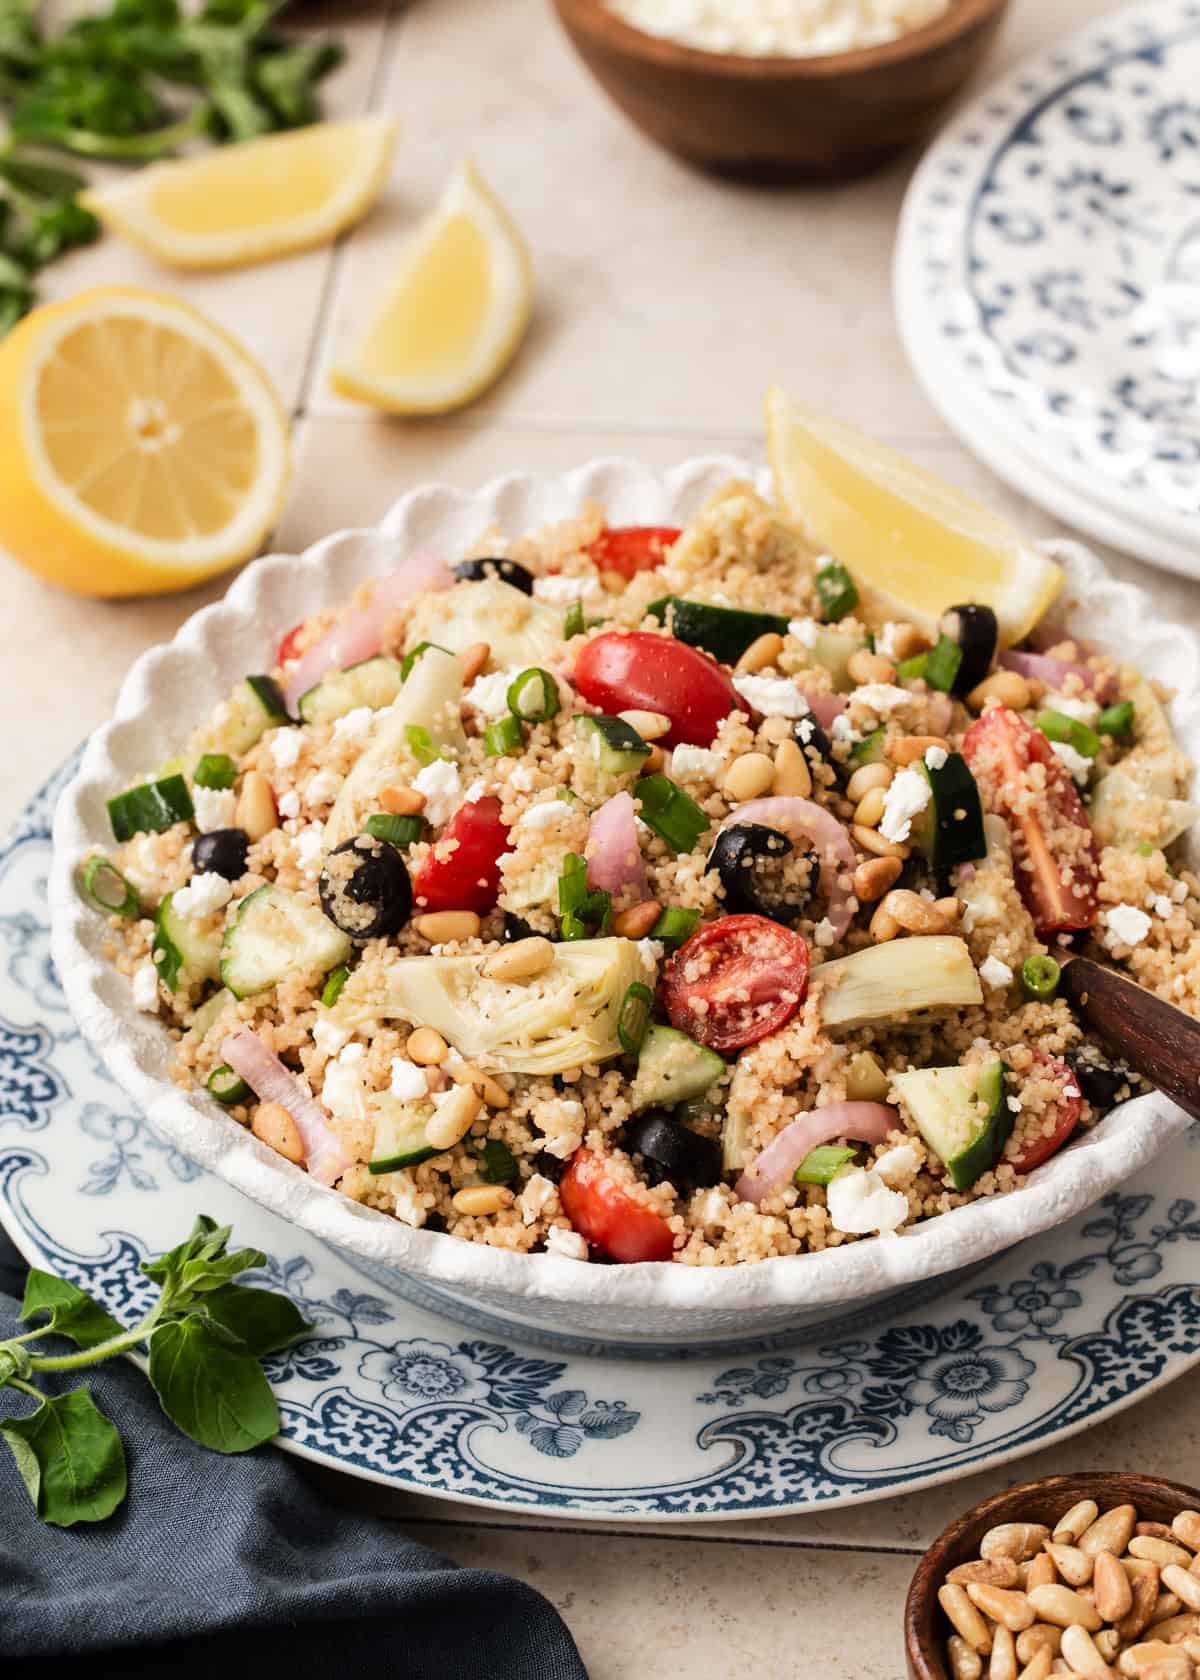 round bowl filled with couscous salad full of veggies, layered on blue and white plate surrounded by lemons, pine nuts and green herbs.